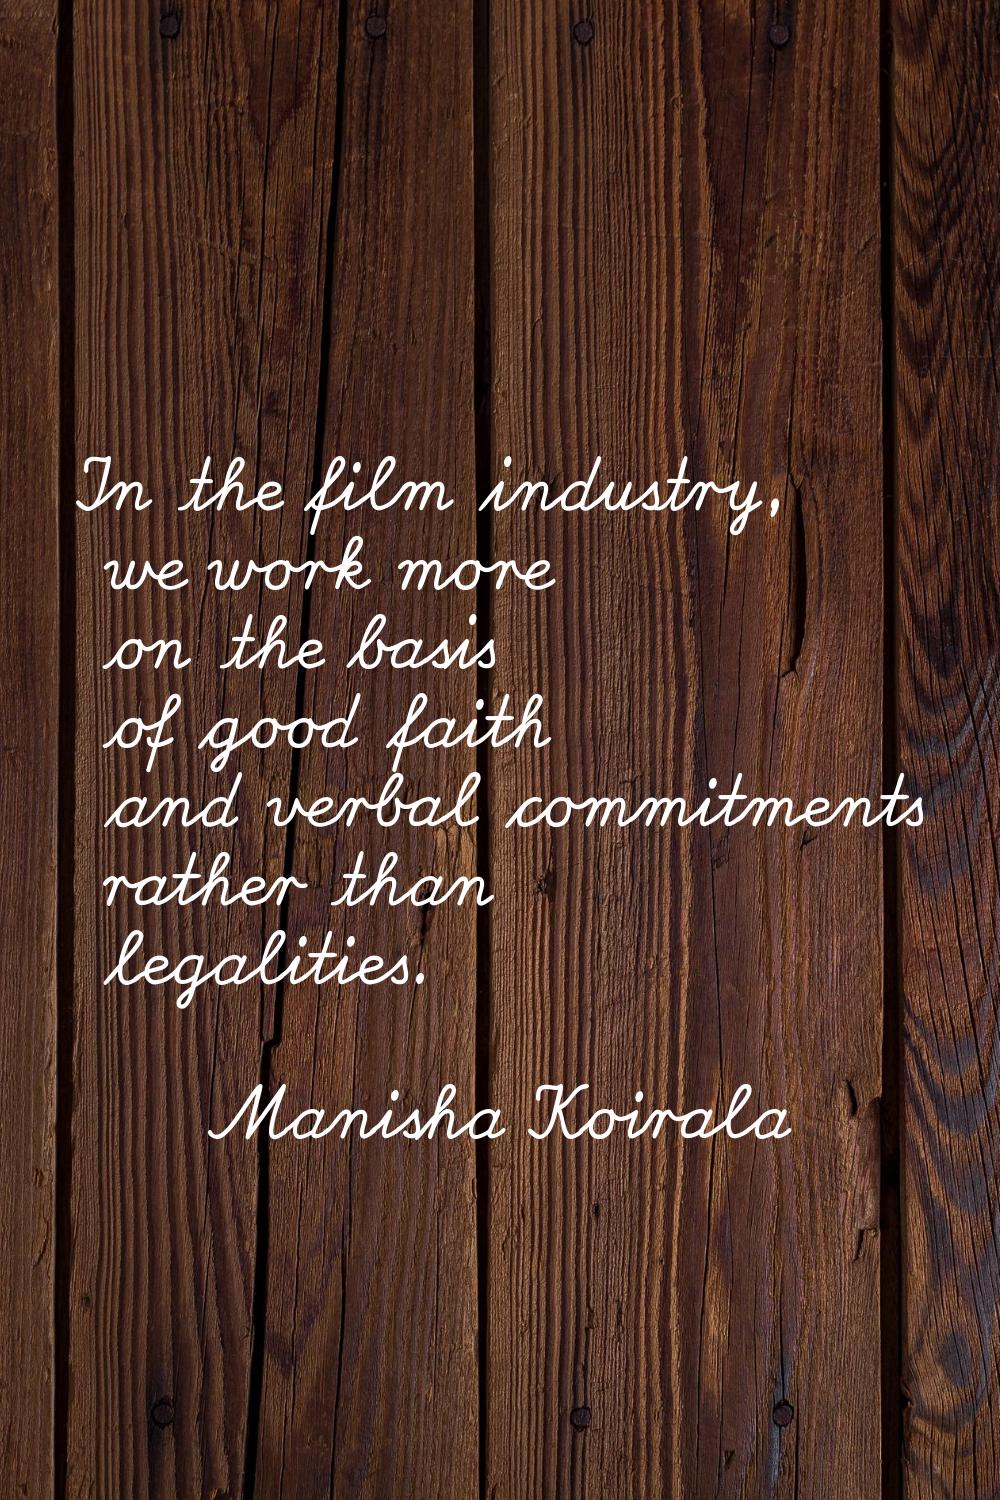 In the film industry, we work more on the basis of good faith and verbal commitments rather than le